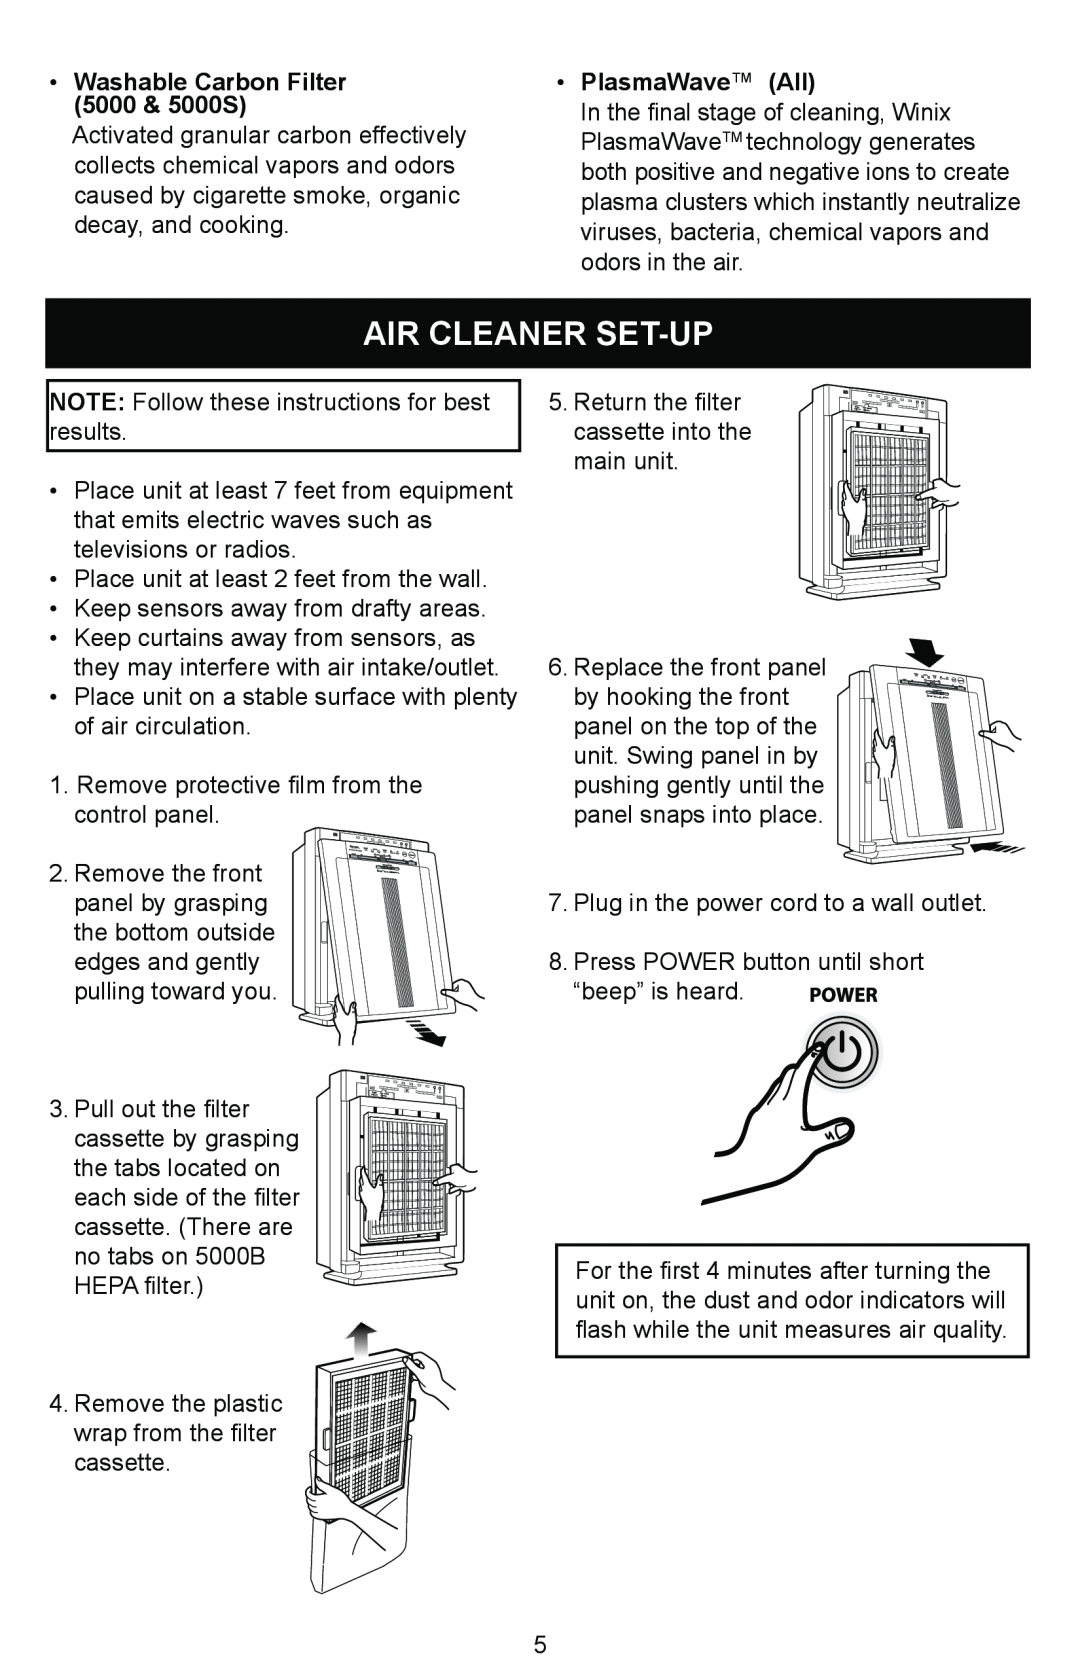 Winix manual Air Cleaner Set-Up, Washable Carbon Filter 5000 & 5000S, PlasmaWave All 